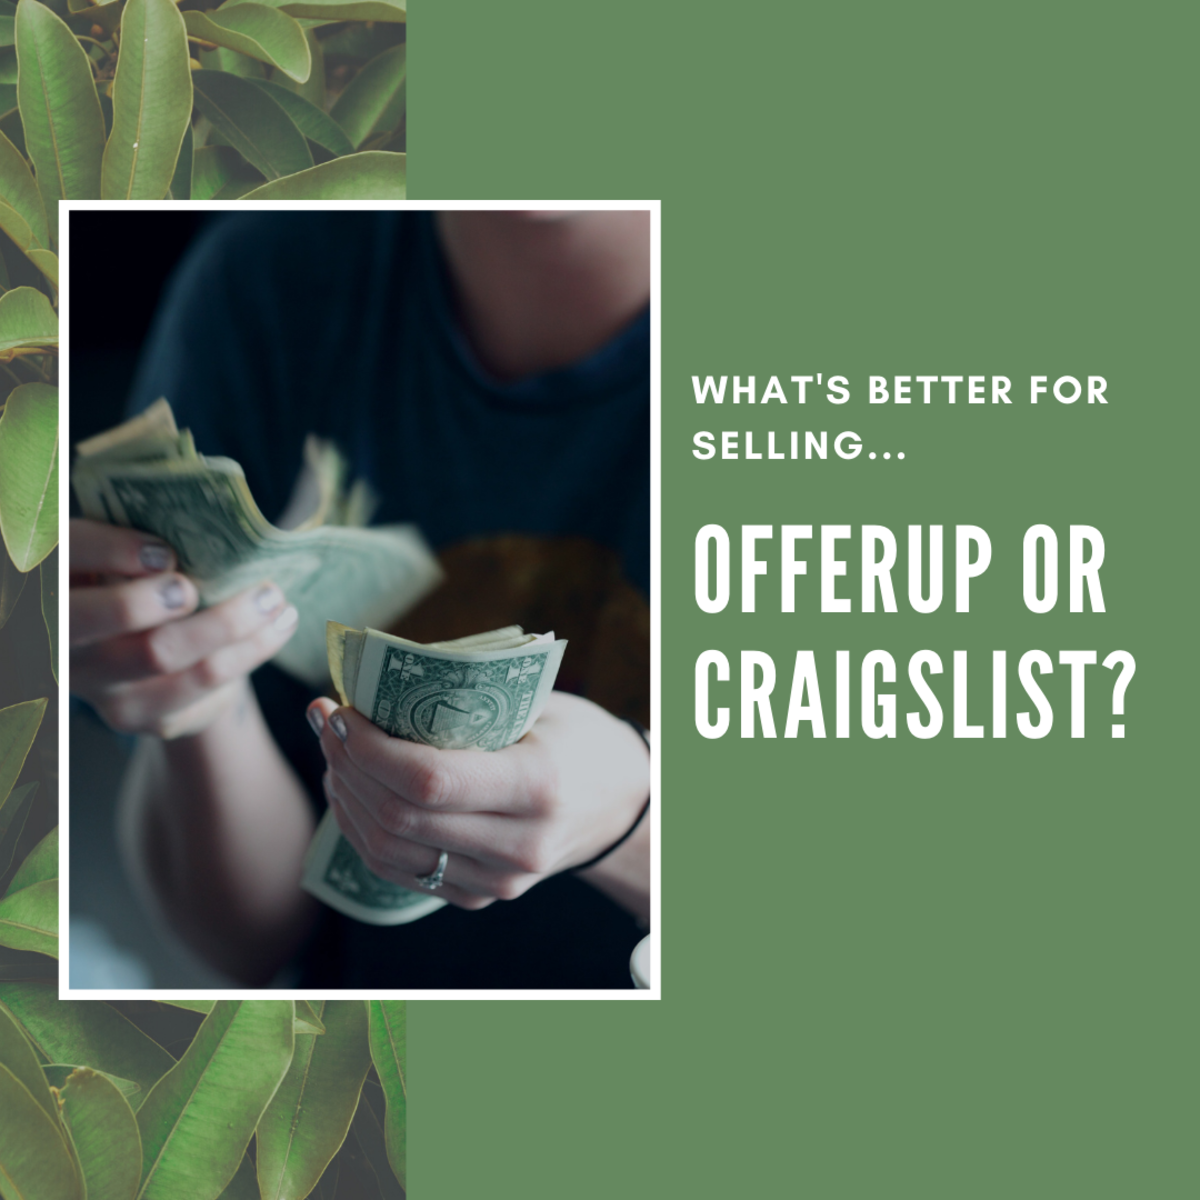 OfferUp vs. Craigslist: Which One Is Better for Selling?